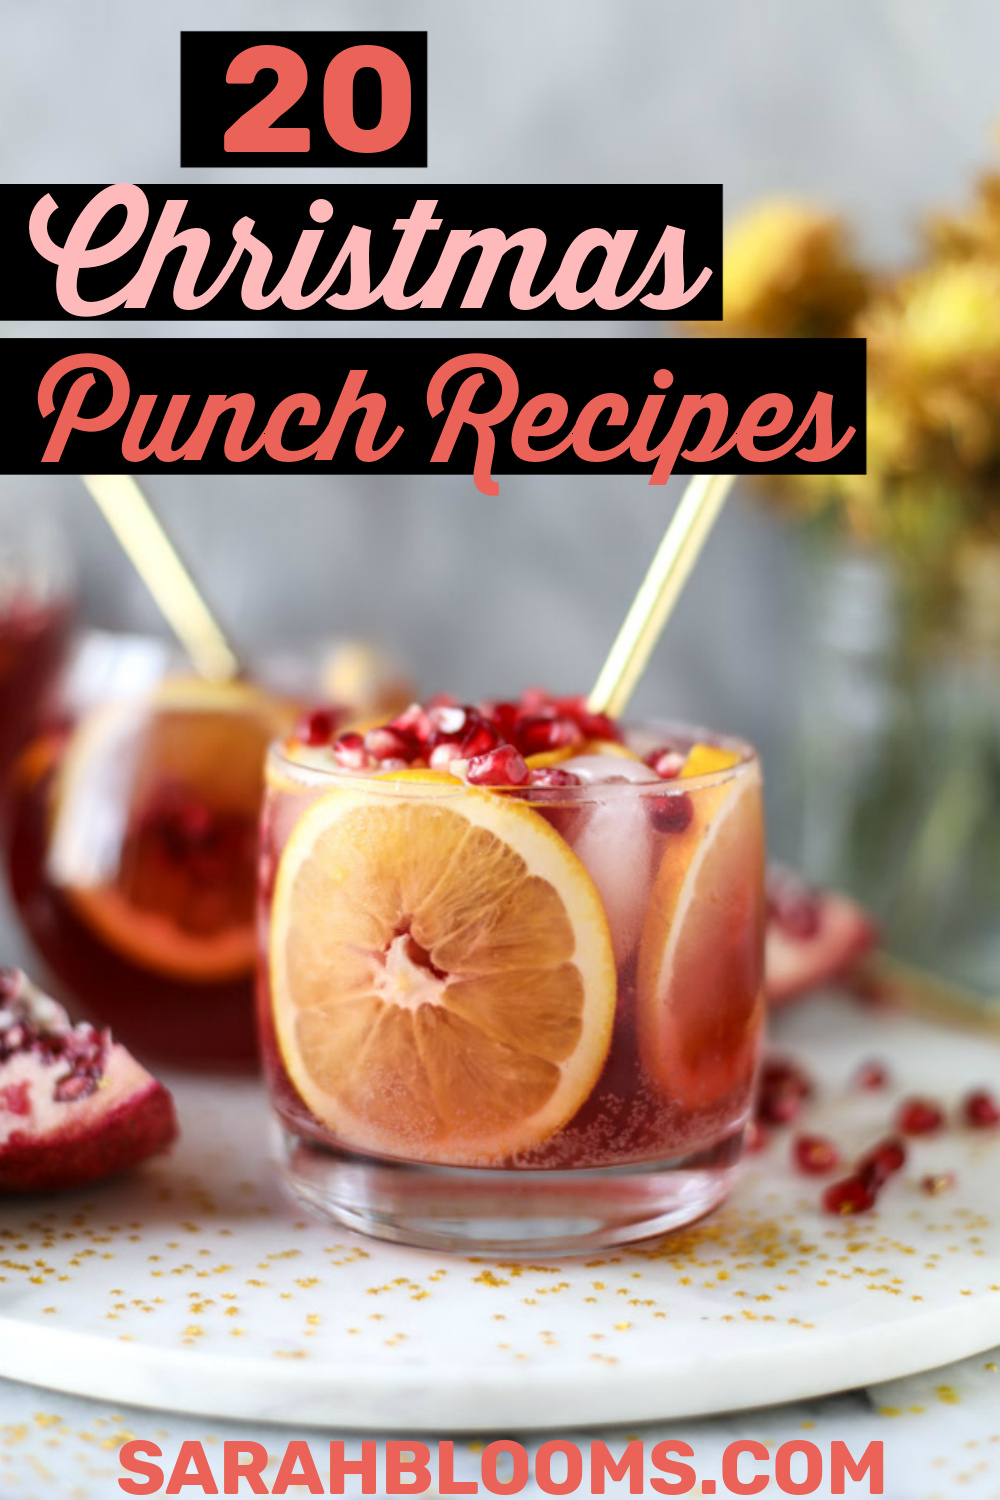 Get your party started with these Best Ever Holiday Punch Recipes your guests will love! #punch #christmaspunch #christmaspunchrecipes #holidaypunch #holidaydrinks #holidayparty #christmaspartyrecipes #holidayrecipes #christmasdrinks #holidaydrinks